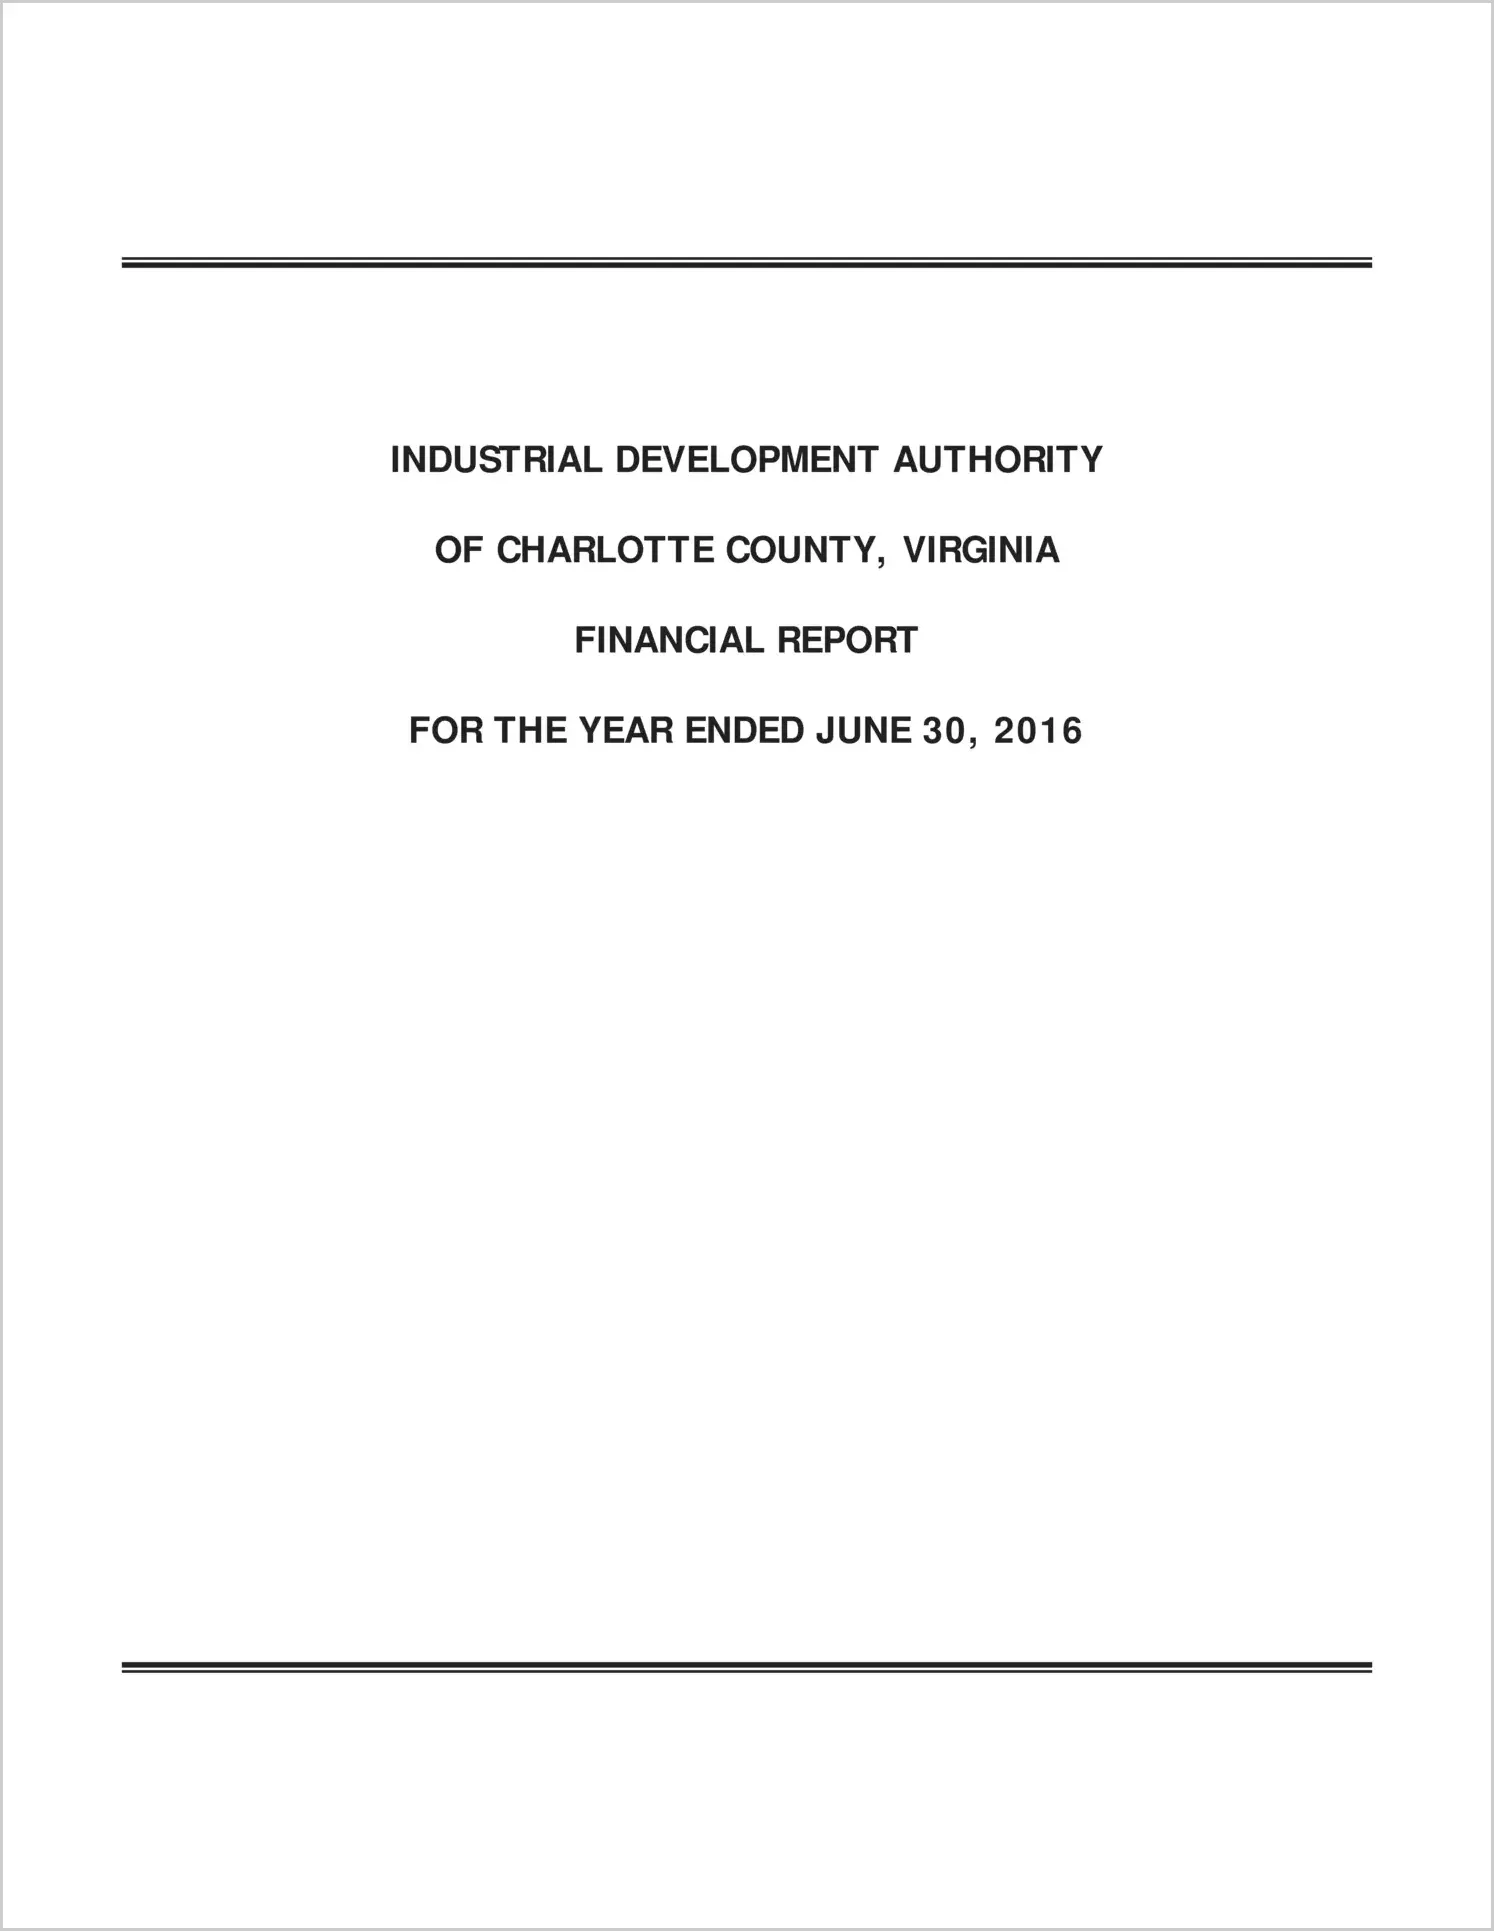 2016 ABC/Other Annual Financial Report  for Charlotte Industrial Development Authority